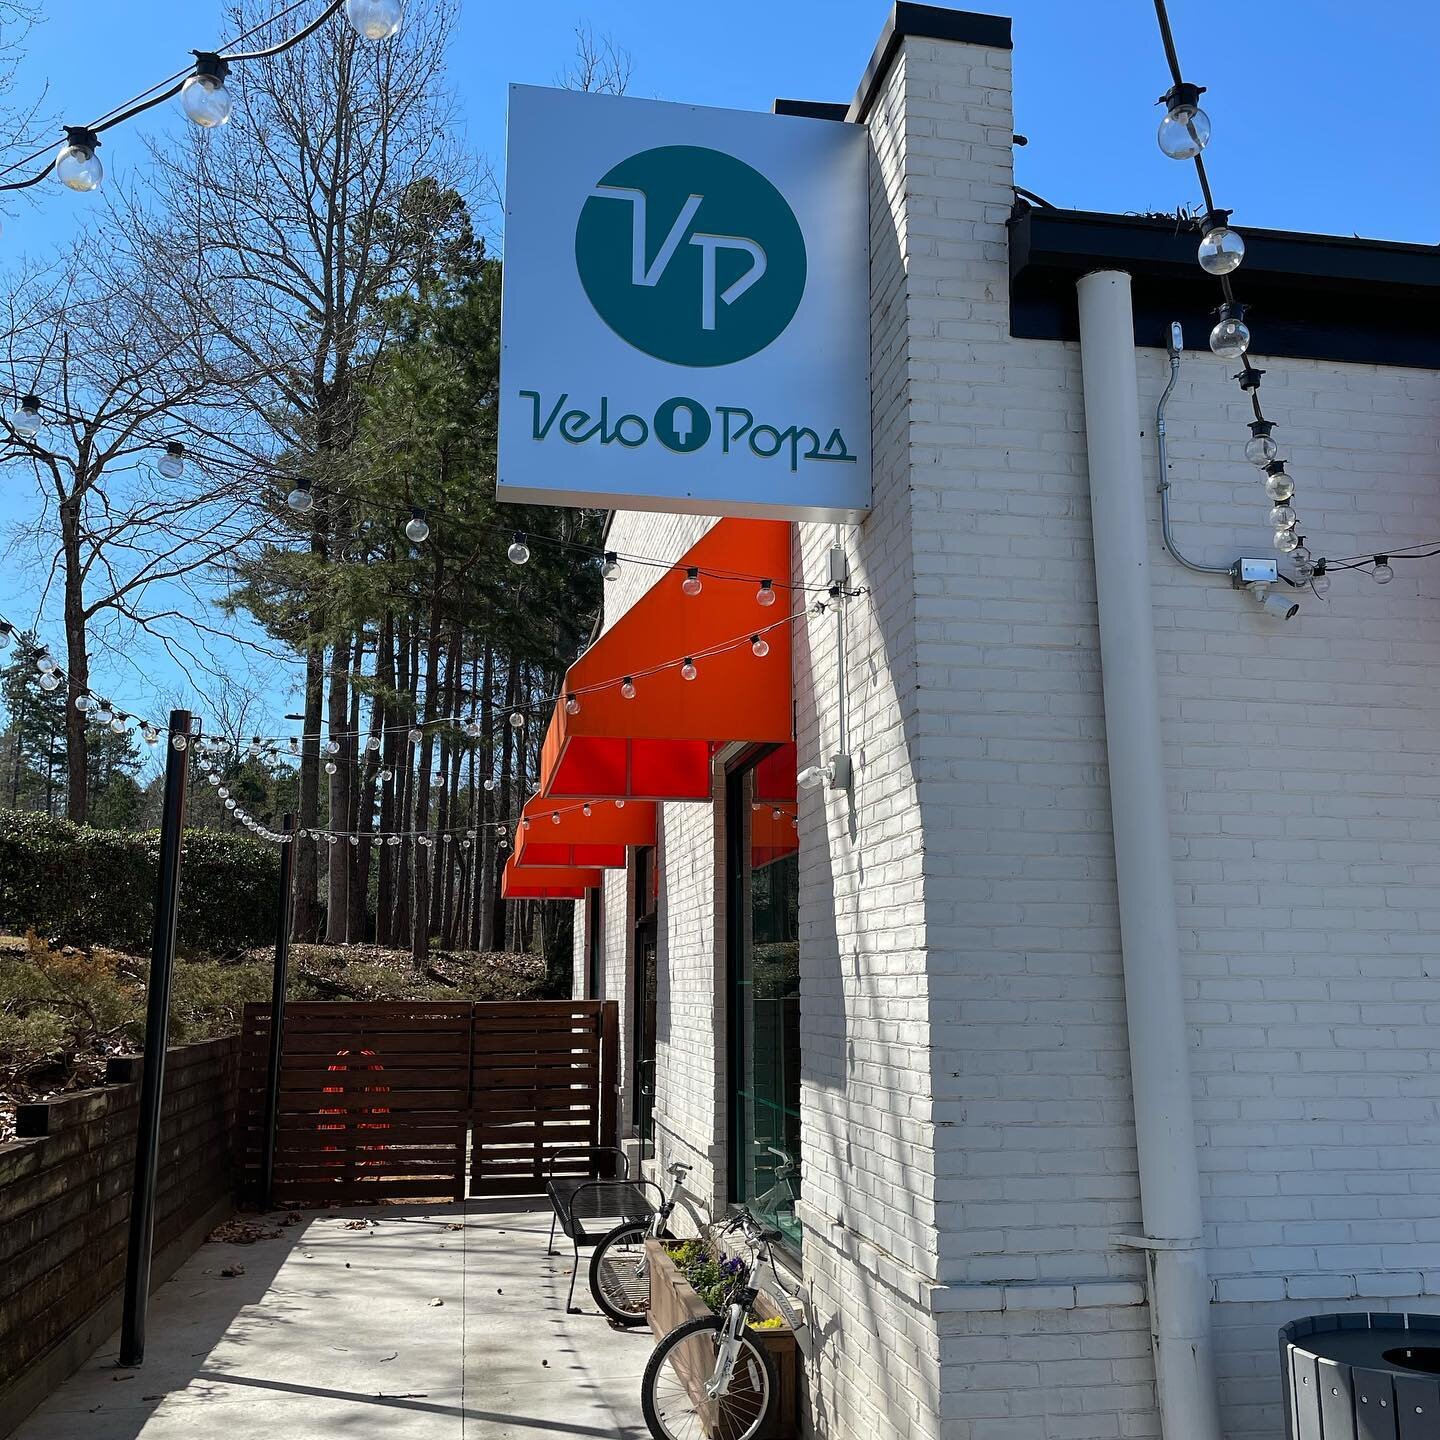 Pops on the patio weather is back!! 

Come by and soak up some sunshine with us - we are here from 1:30 until 7:30 every day ☀️

#velopops #velopopsclt #hellovelo #popsonthepatio #patioweather #sunshine